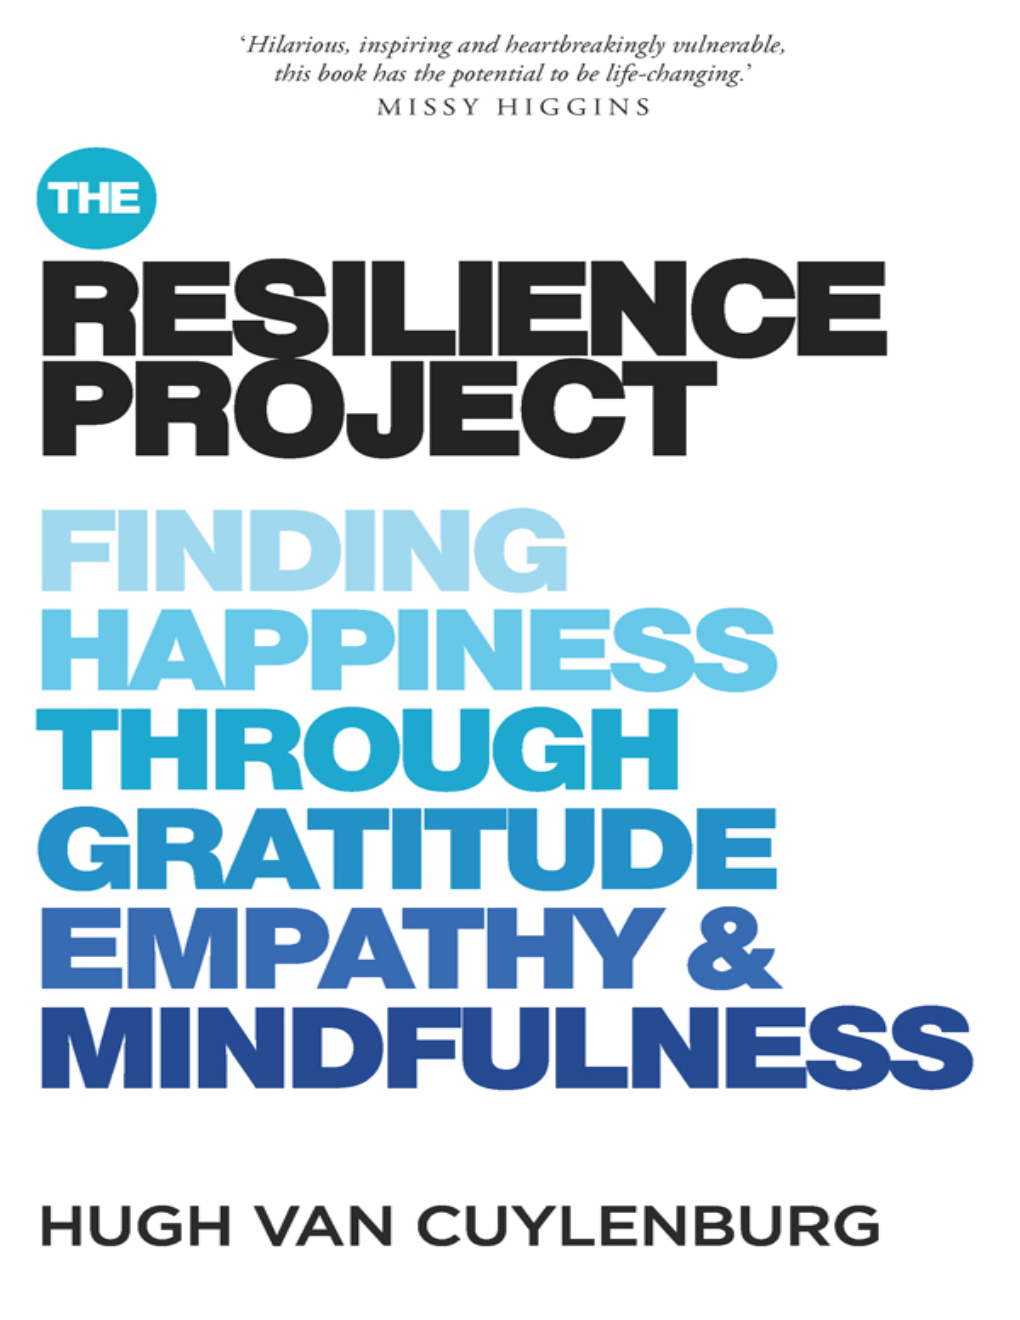 The Resilience Project, with His Playful and Unorthodox Presentations Which Both Entertain and Inform